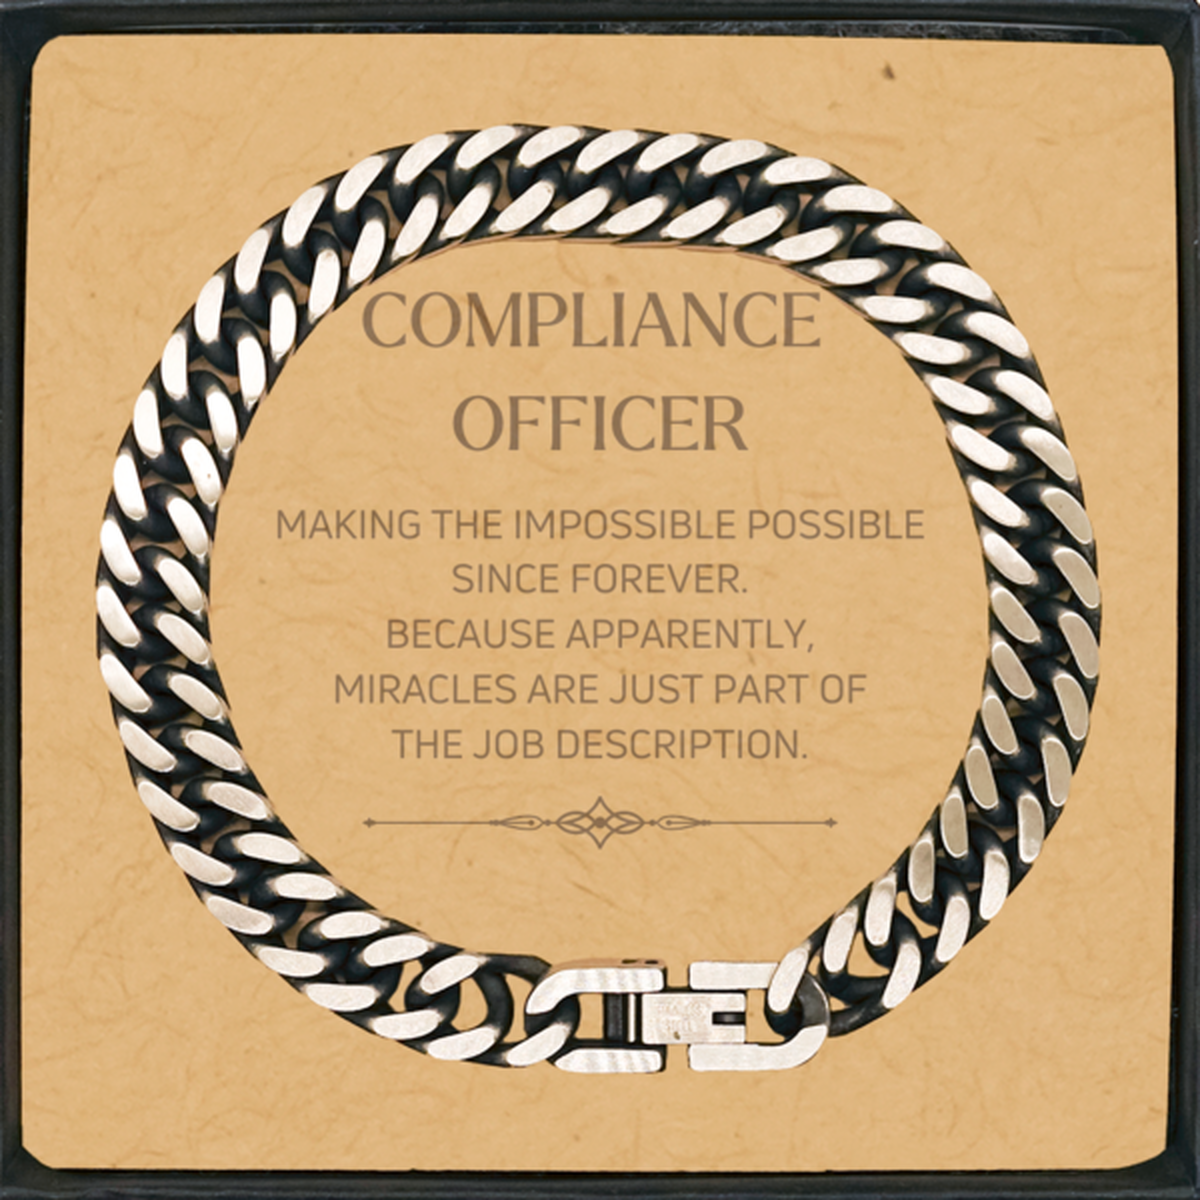 Funny Compliance Officer Gifts, Miracles are just part of the job description, Inspirational Birthday Cuban Link Chain Bracelet For Compliance Officer, Men, Women, Coworkers, Friends, Boss